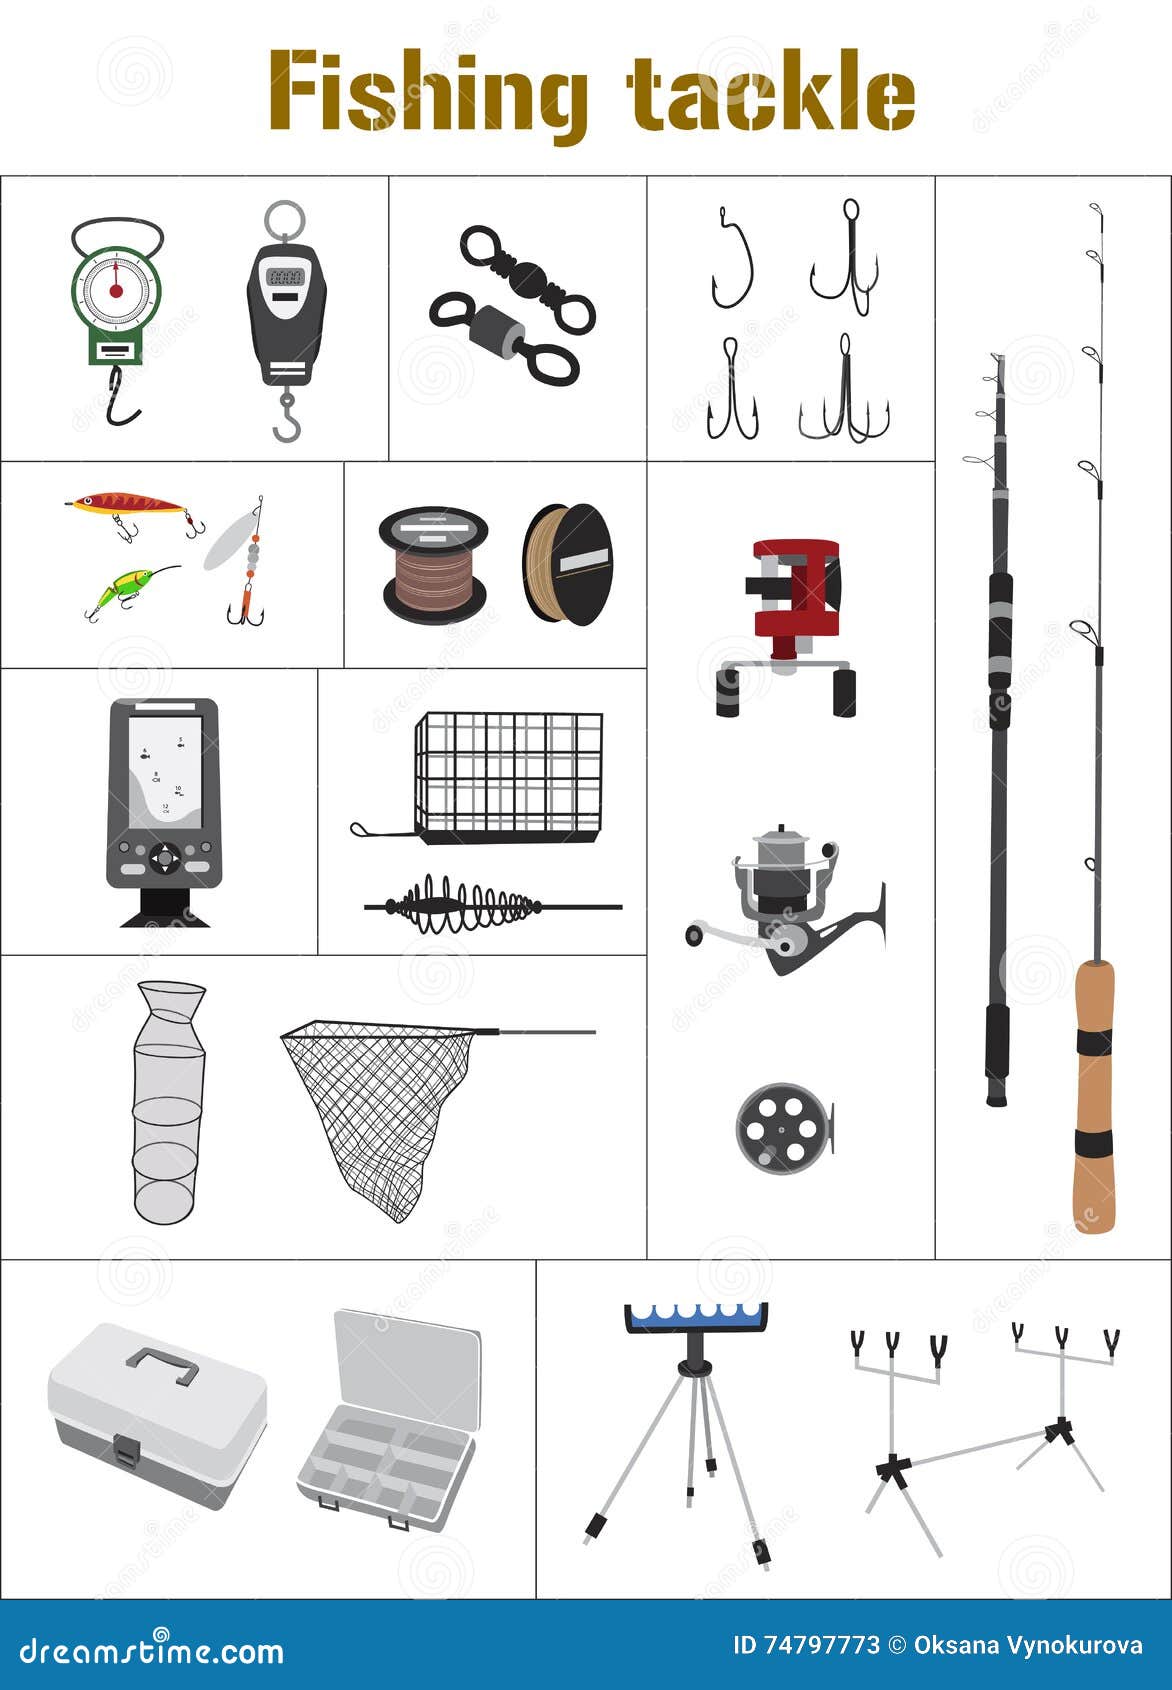 https://thumbs.dreamstime.com/z/fishing-tackle-flat-icon-collection-set-rod-bait-lure-net-other-gear-supplies-equipment-abstract-vector-illustration-74797773.jpg